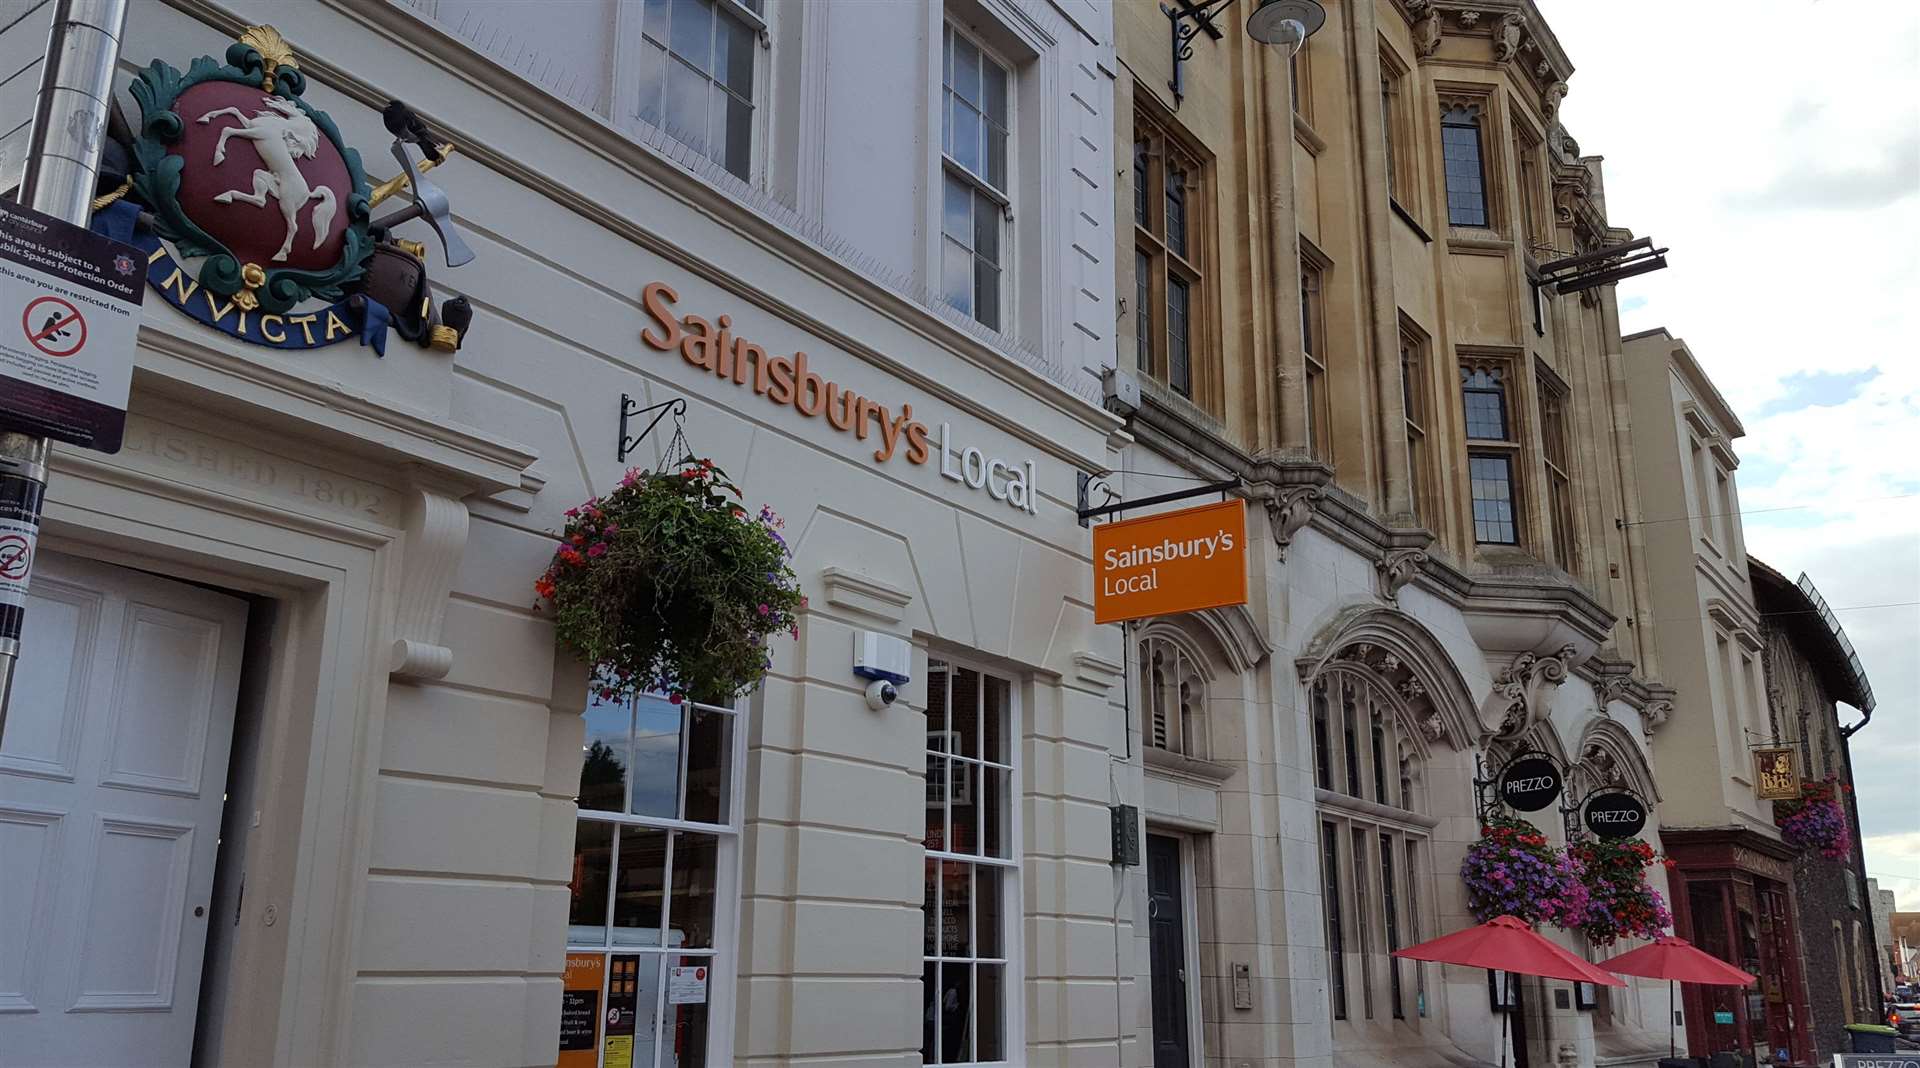 The new Sainsbury's store is opening in Canterbury High Street today